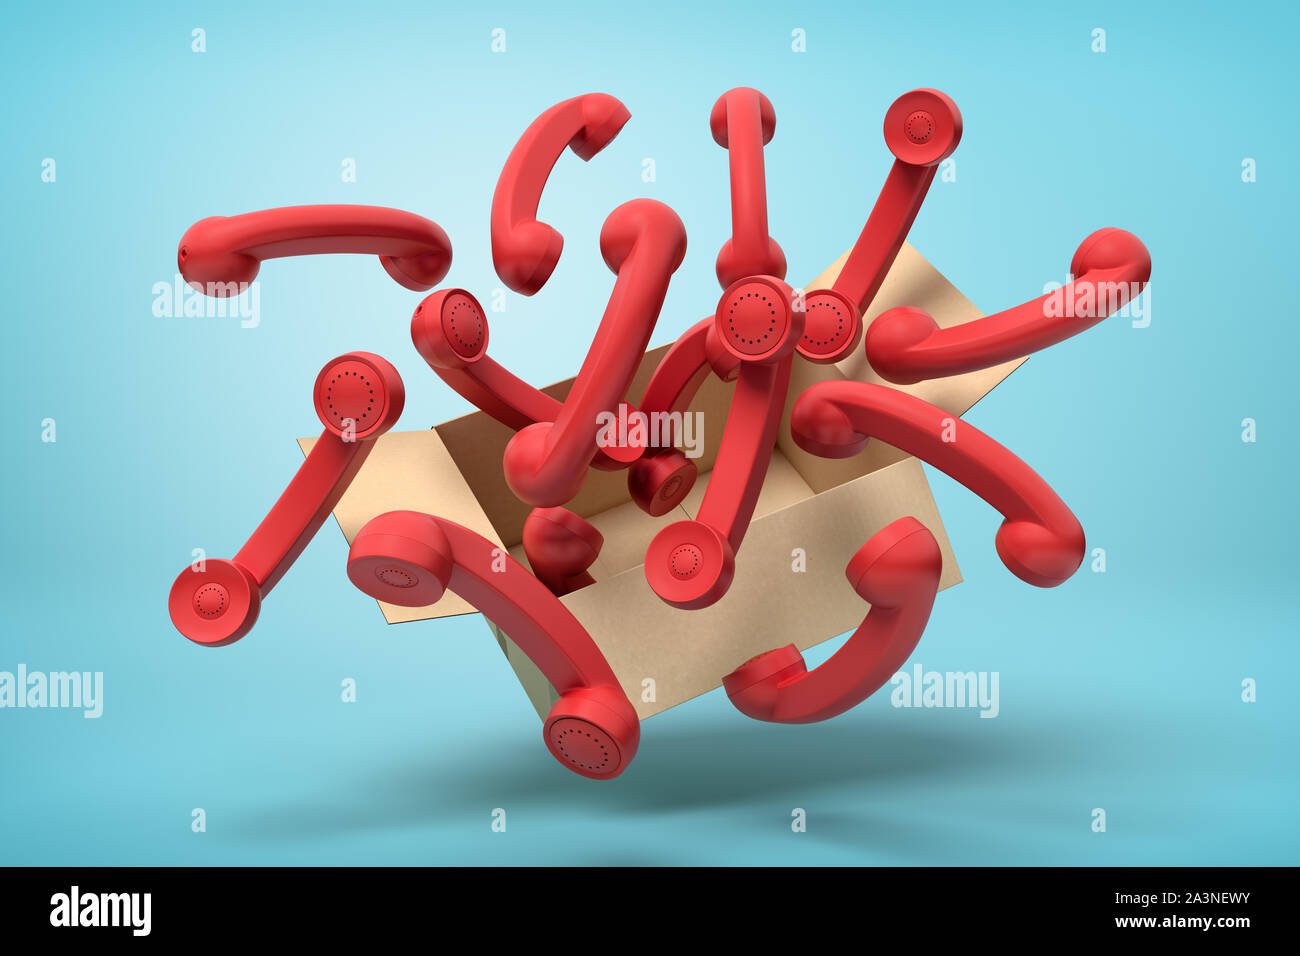 3d rendering of cardboard box suspended in air full of red landline phone receivers which are flying out on light-blue background. Stock Photo